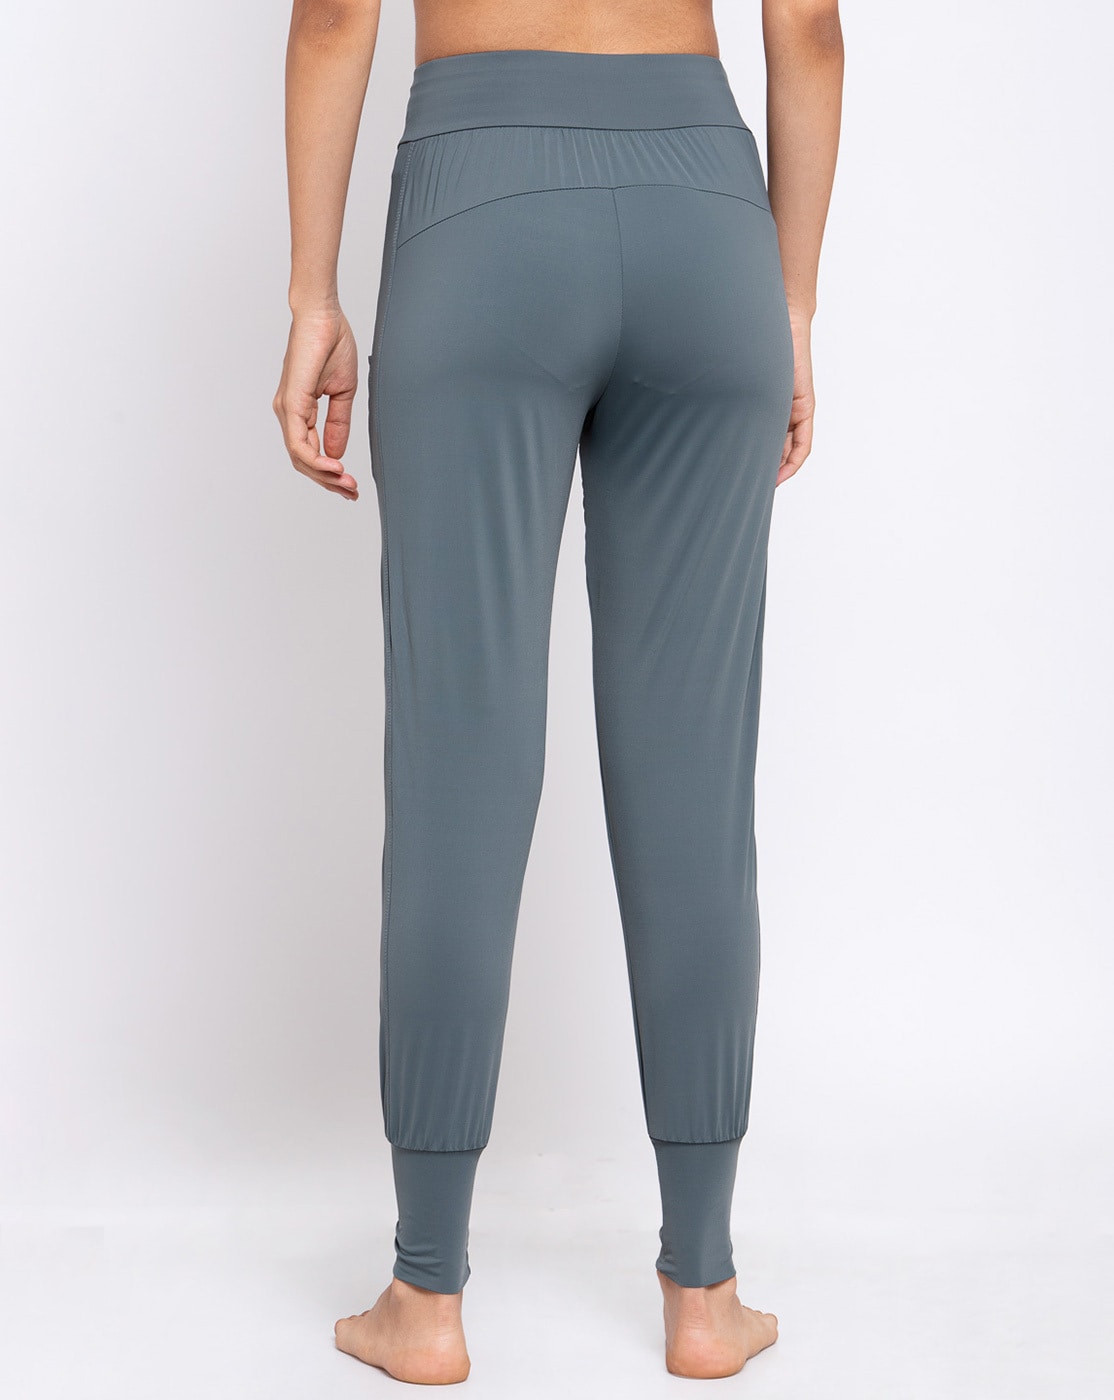 Run Cropped Tights with Insert Pockets